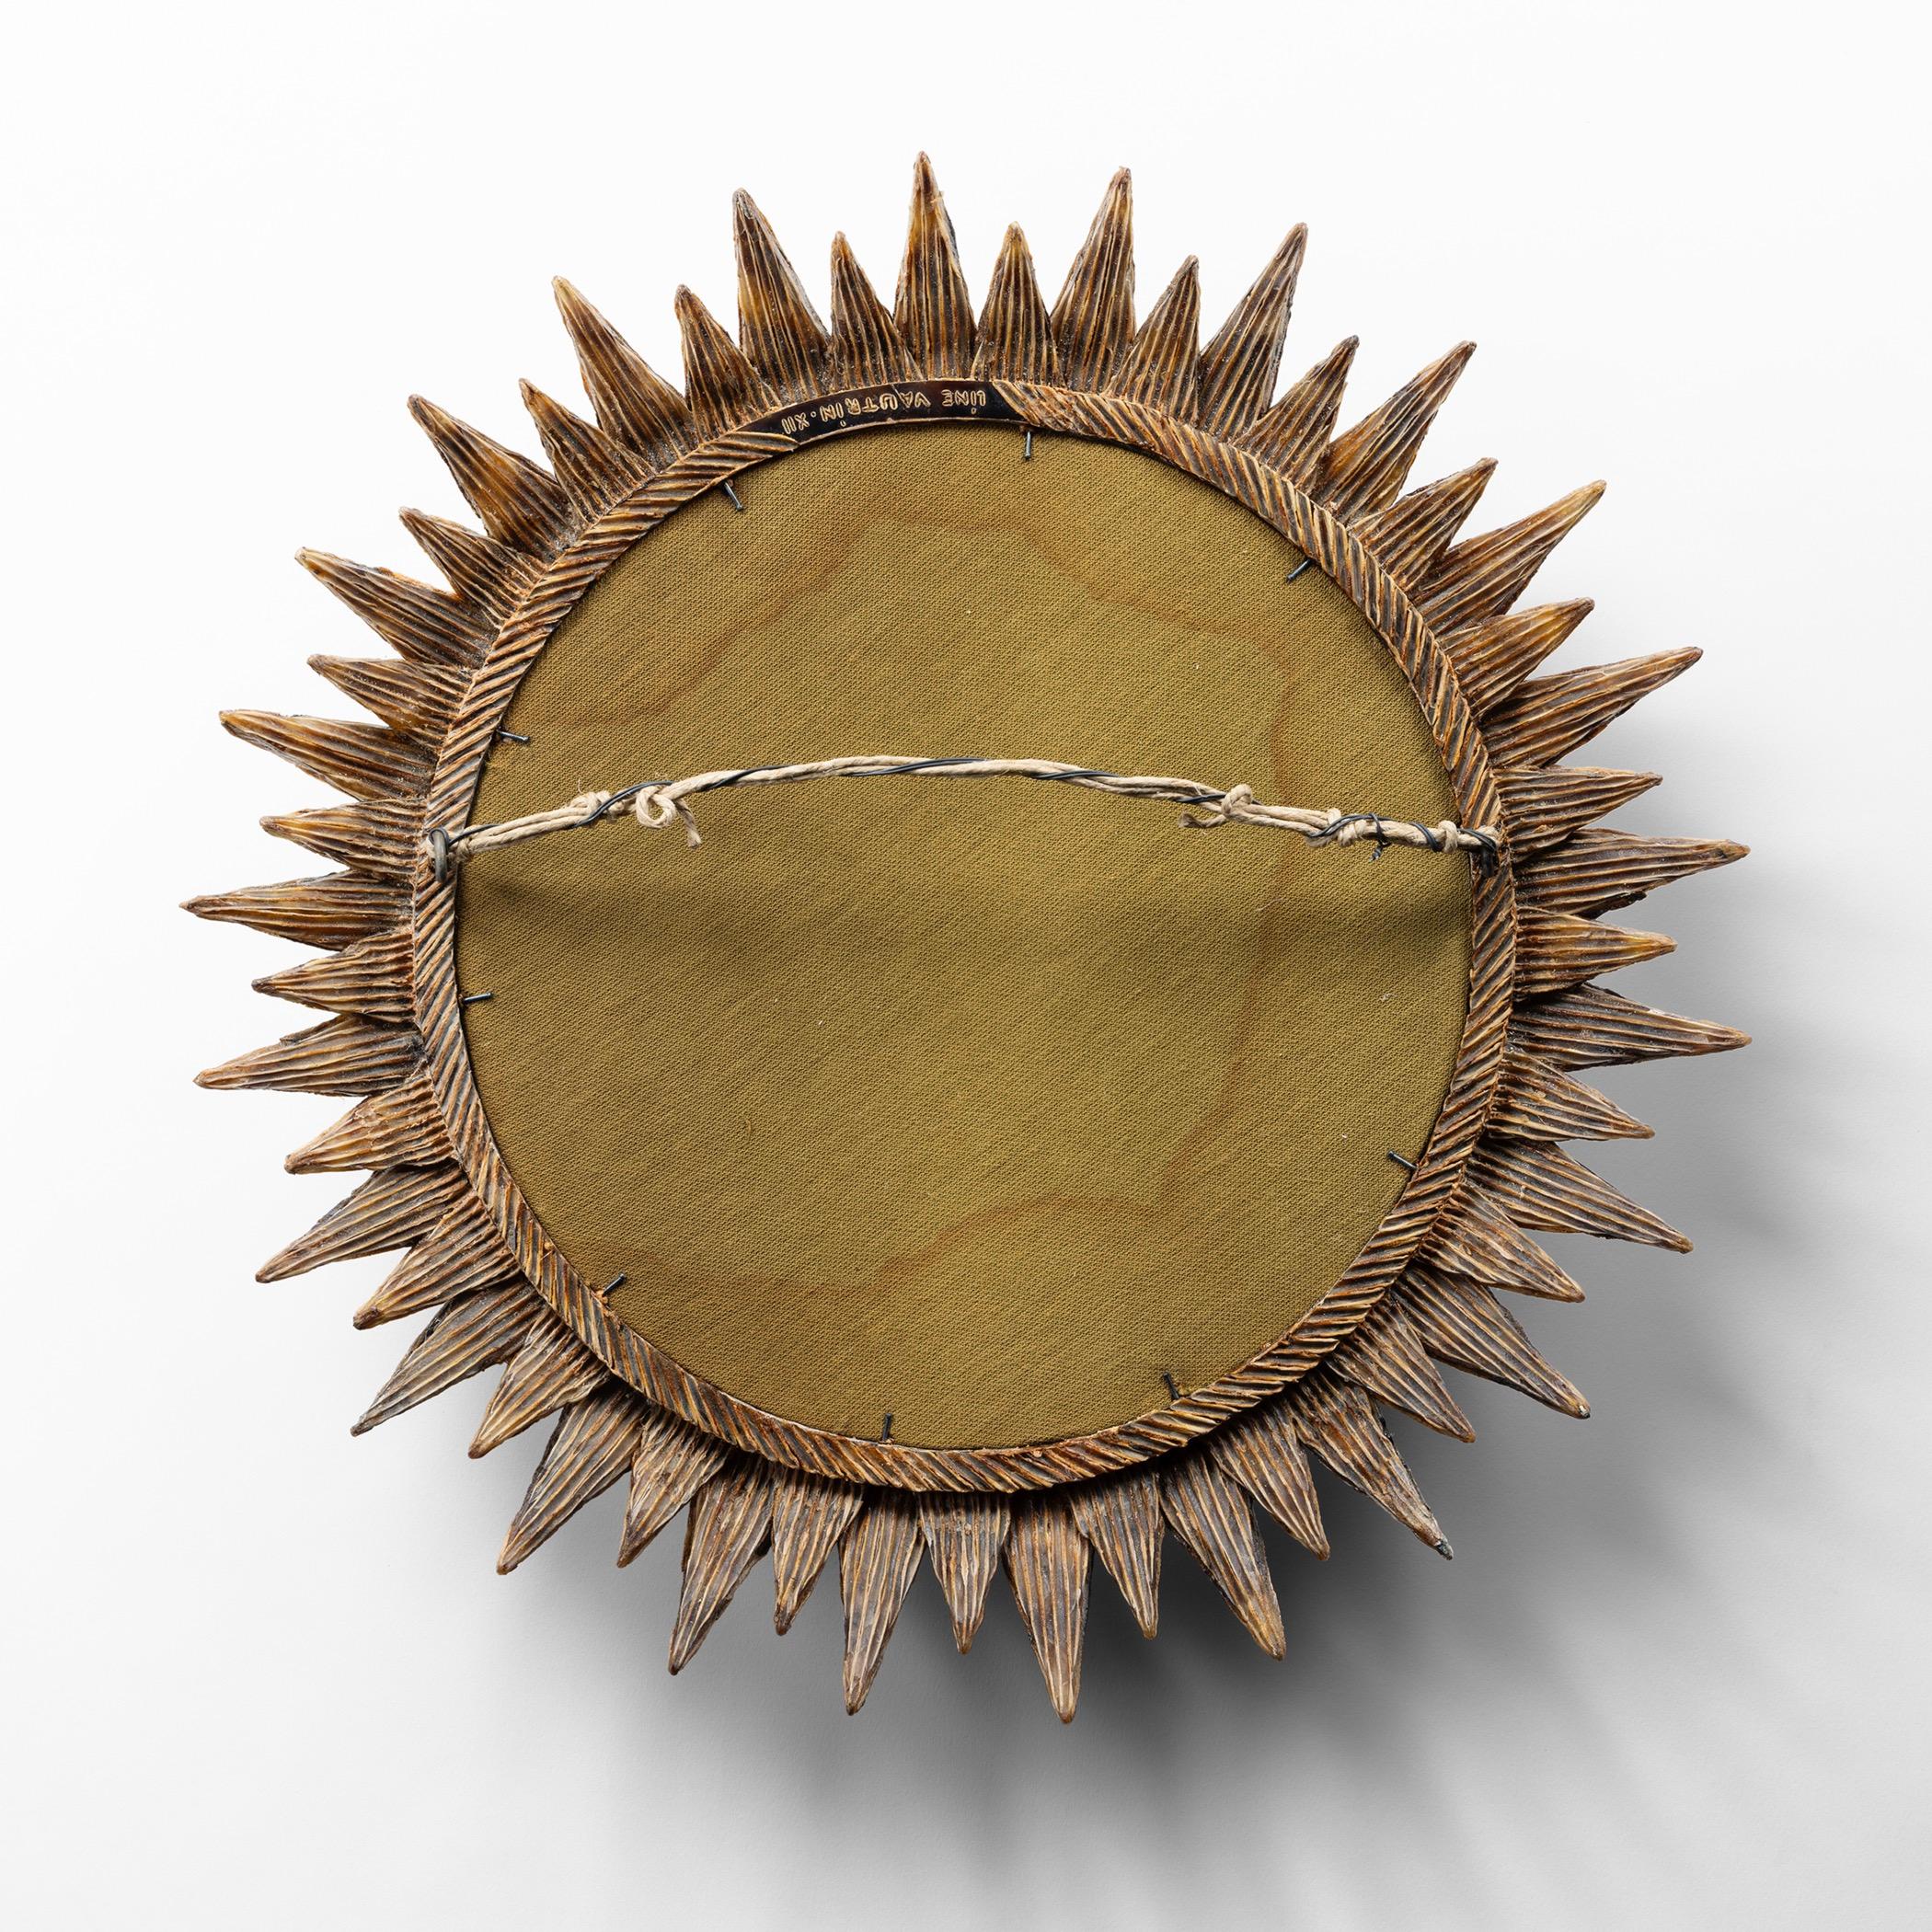 French Soleil à pointes (Spiked sun) by Line Vautrin – Talosel mirror For Sale